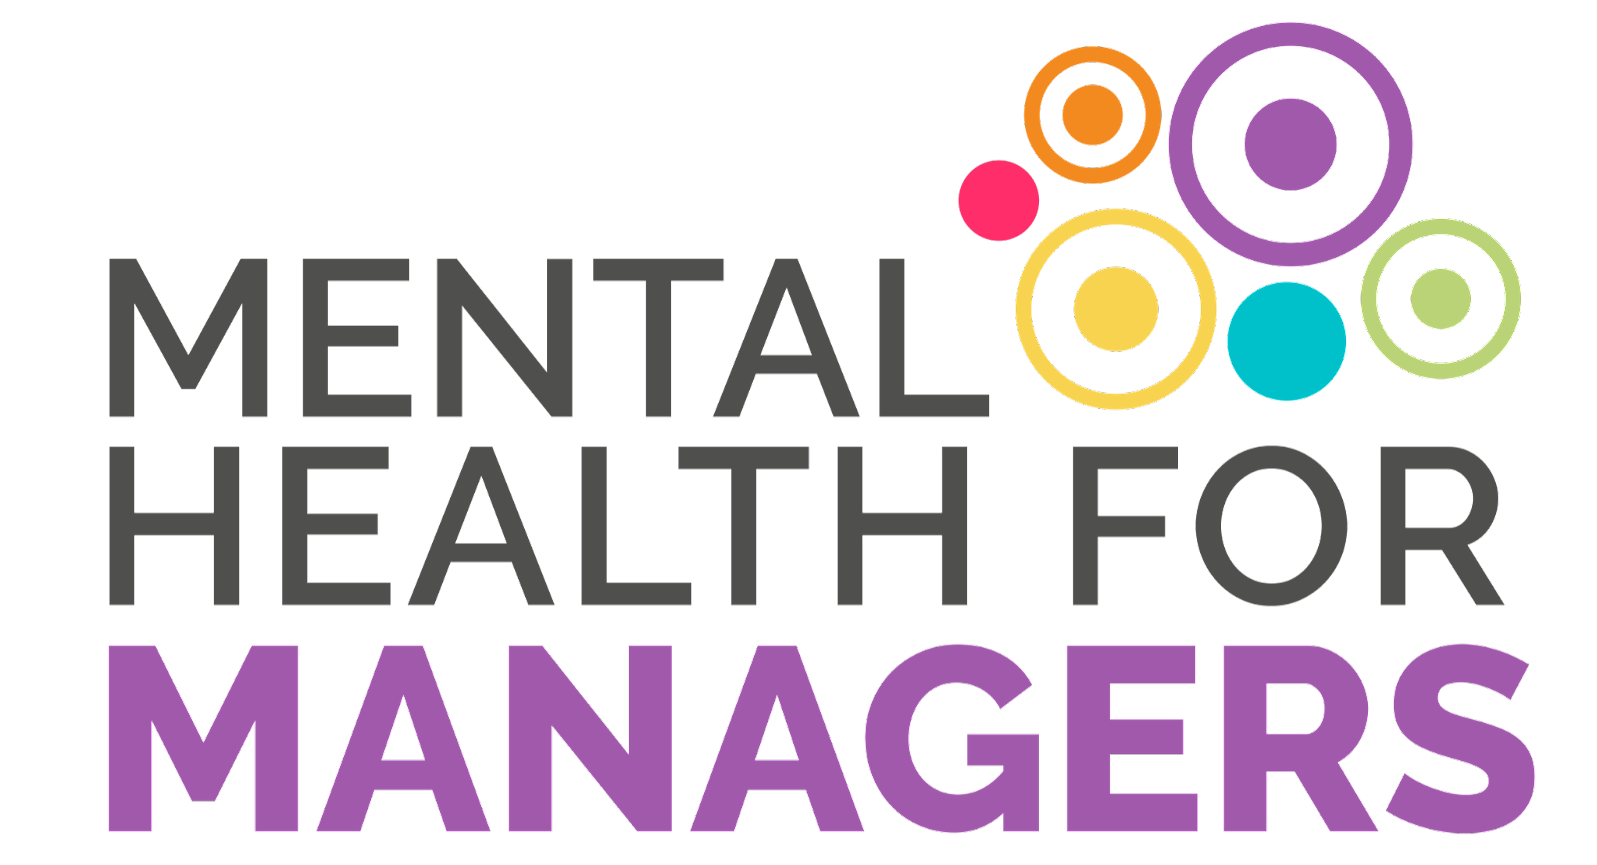 Mental Health for Managers